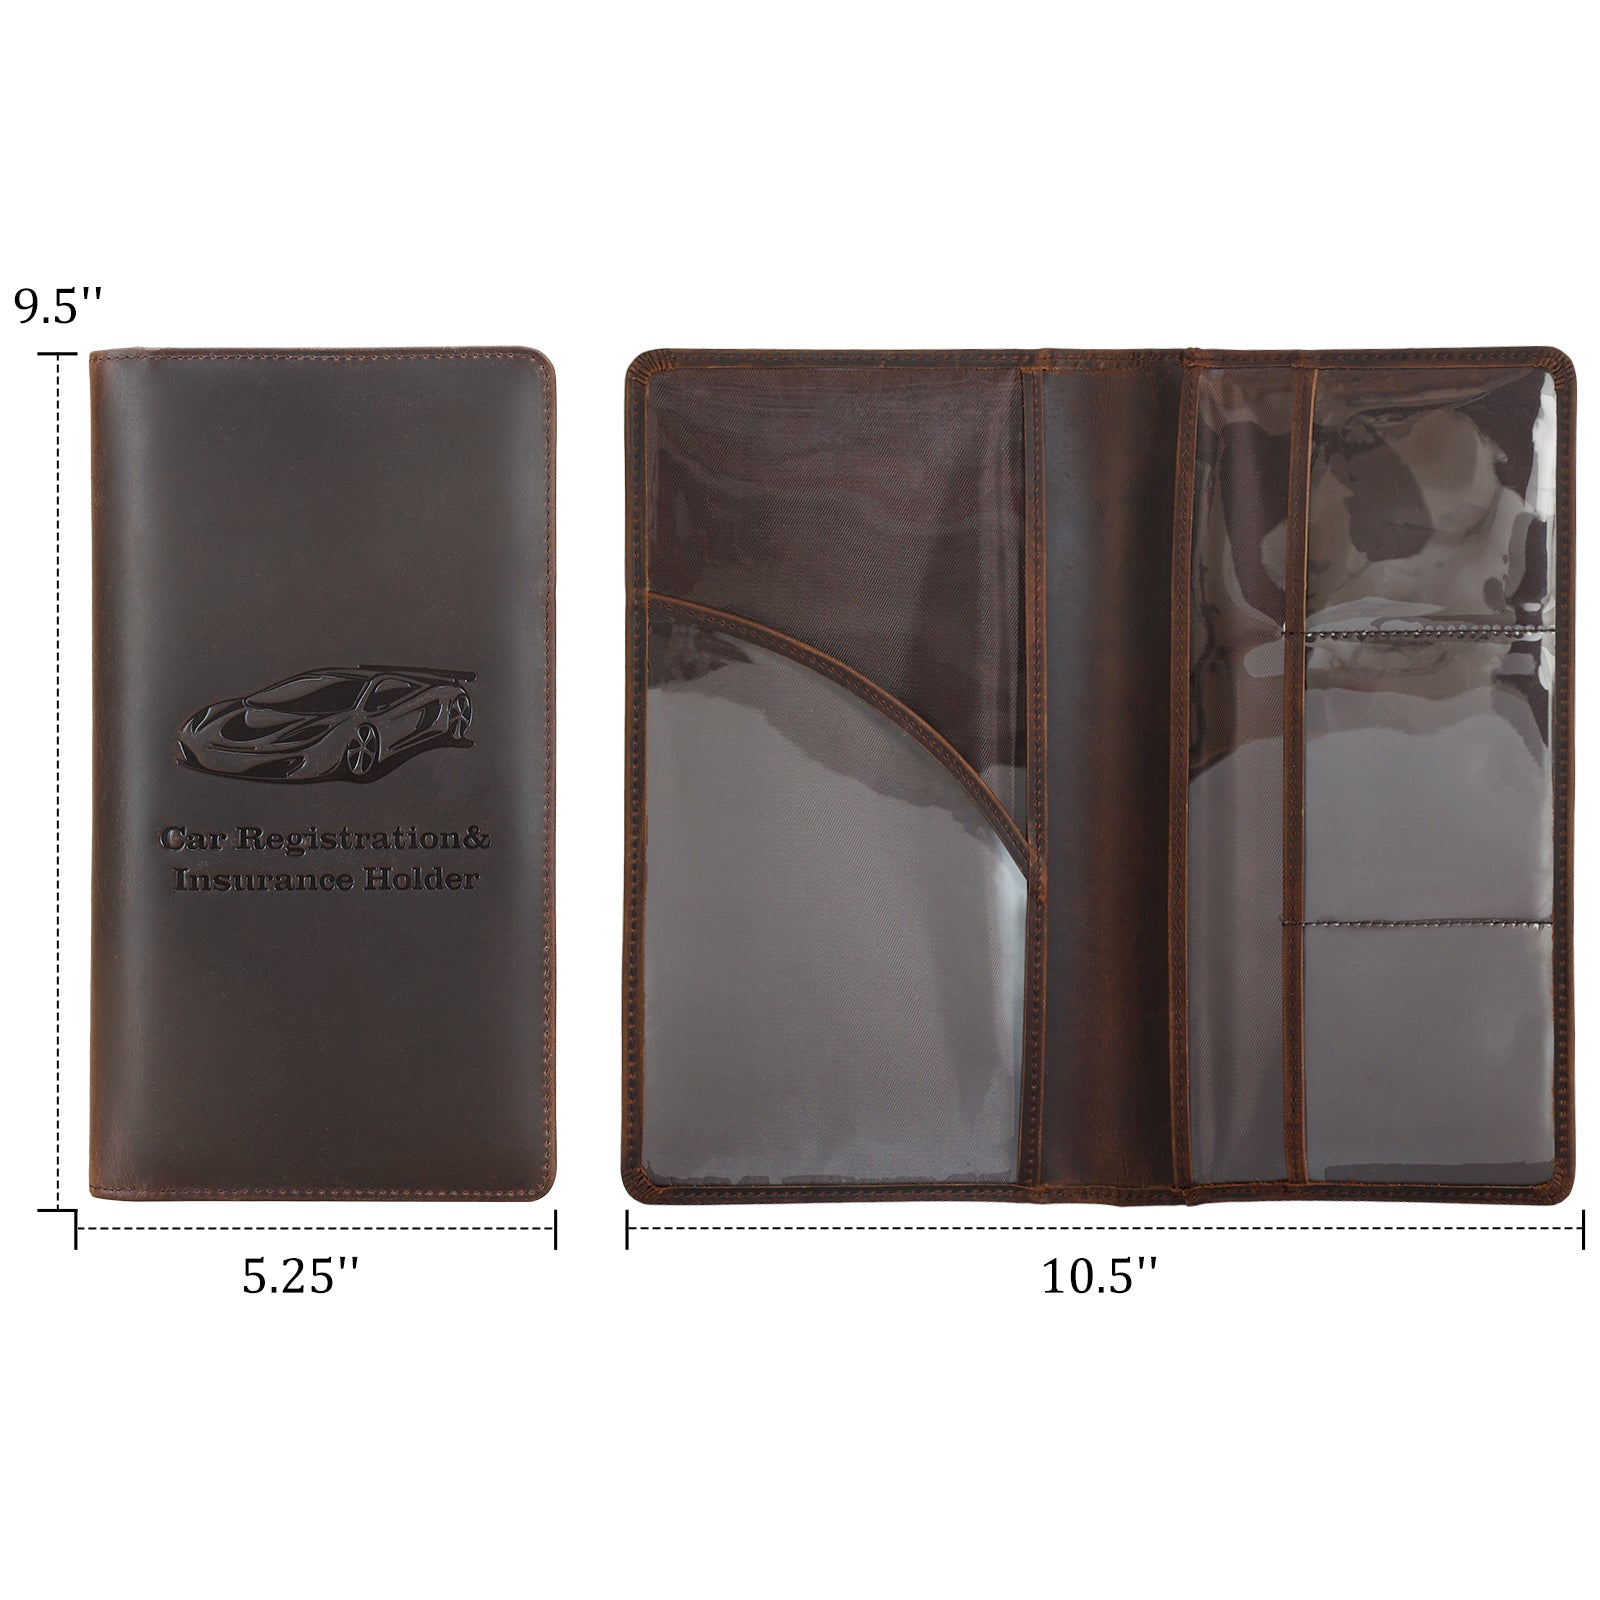 Full Grain Leather Car Registration and Insurance Card Holder (Dimension)